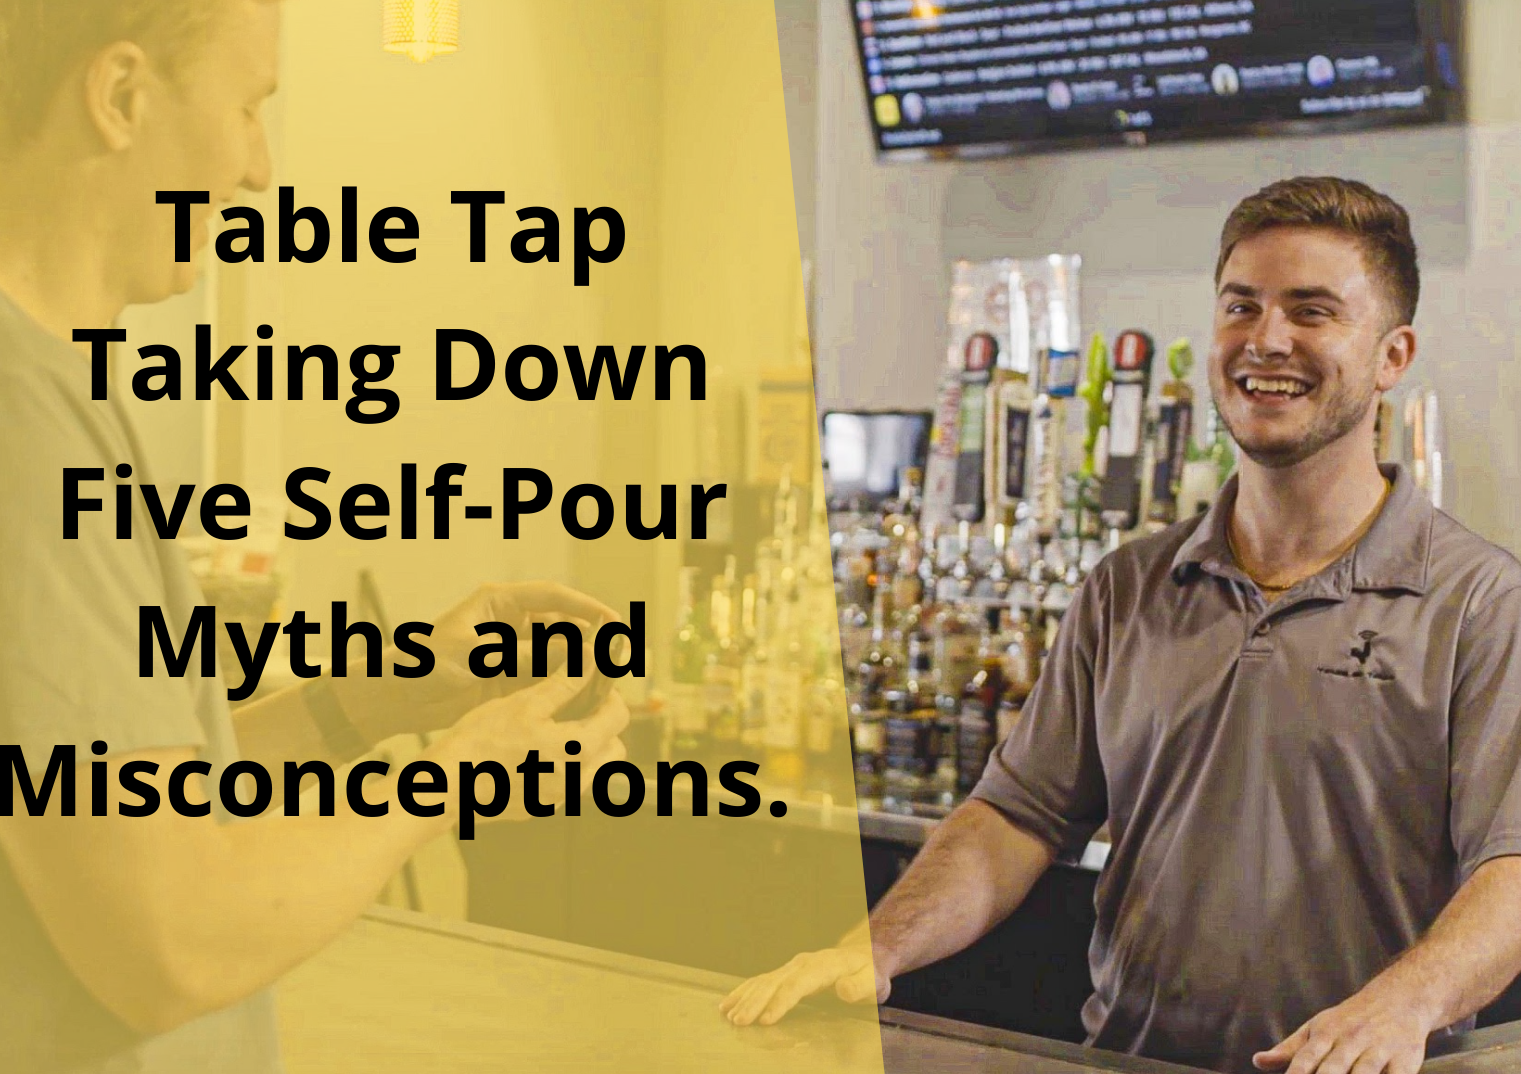 Table Tap Taking Down Five Self-Pour Myths and Misconceptions.